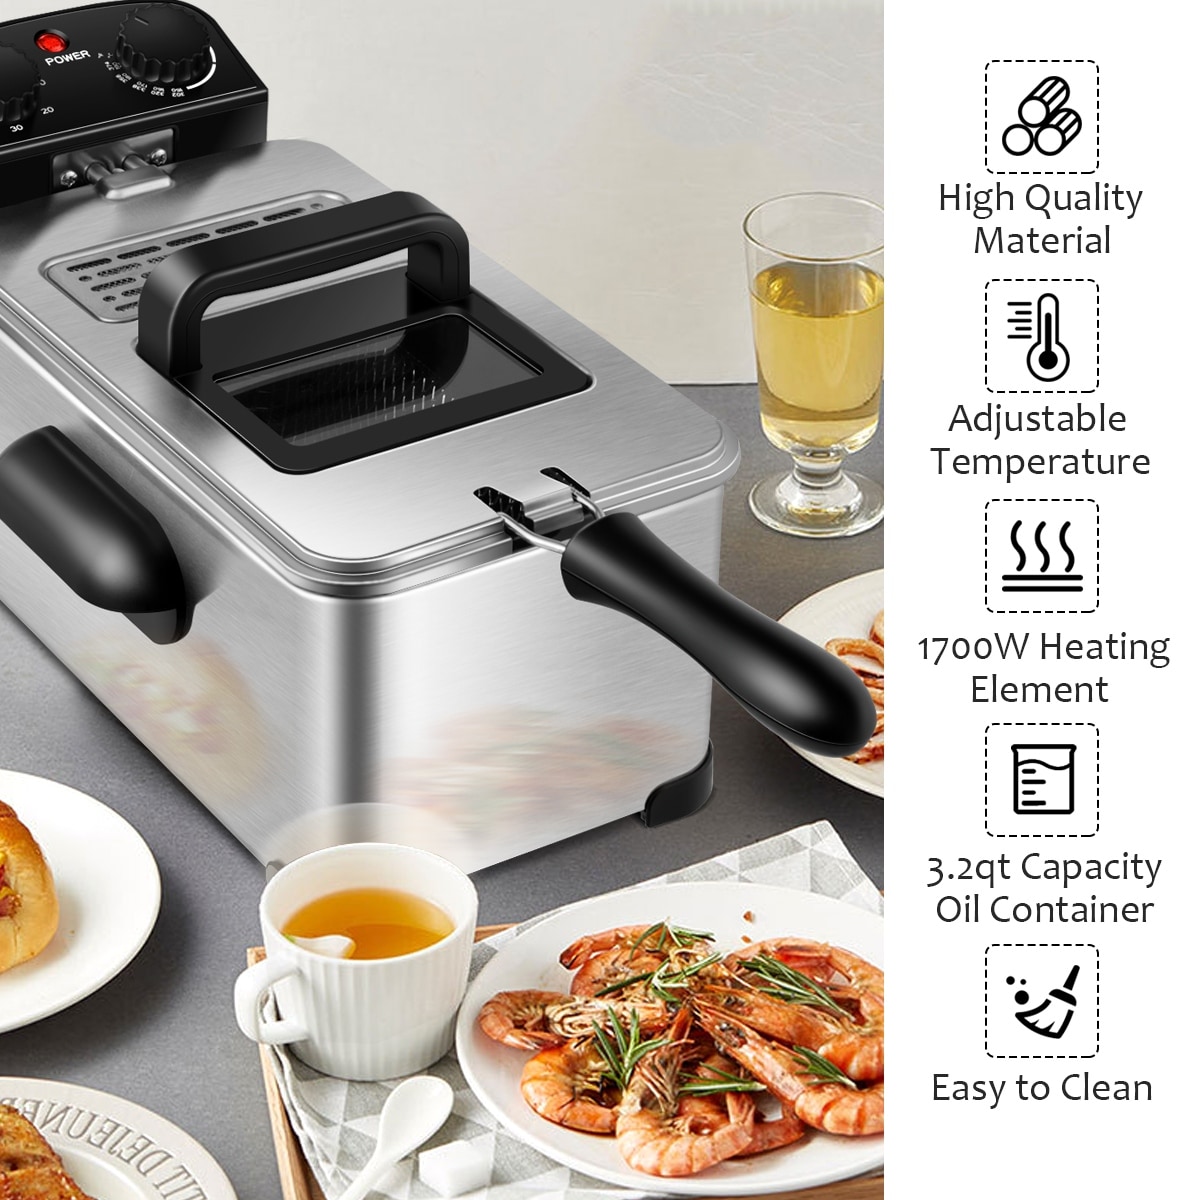 https://ak1.ostkcdn.com/images/products/is/images/direct/7a8ba7fbdc789e1276724c9bf366e749e43b6d38/Costway-3.2-Quart-Electric-Deep-Fryer-1700W-Stainless-Steel-Timer.jpg